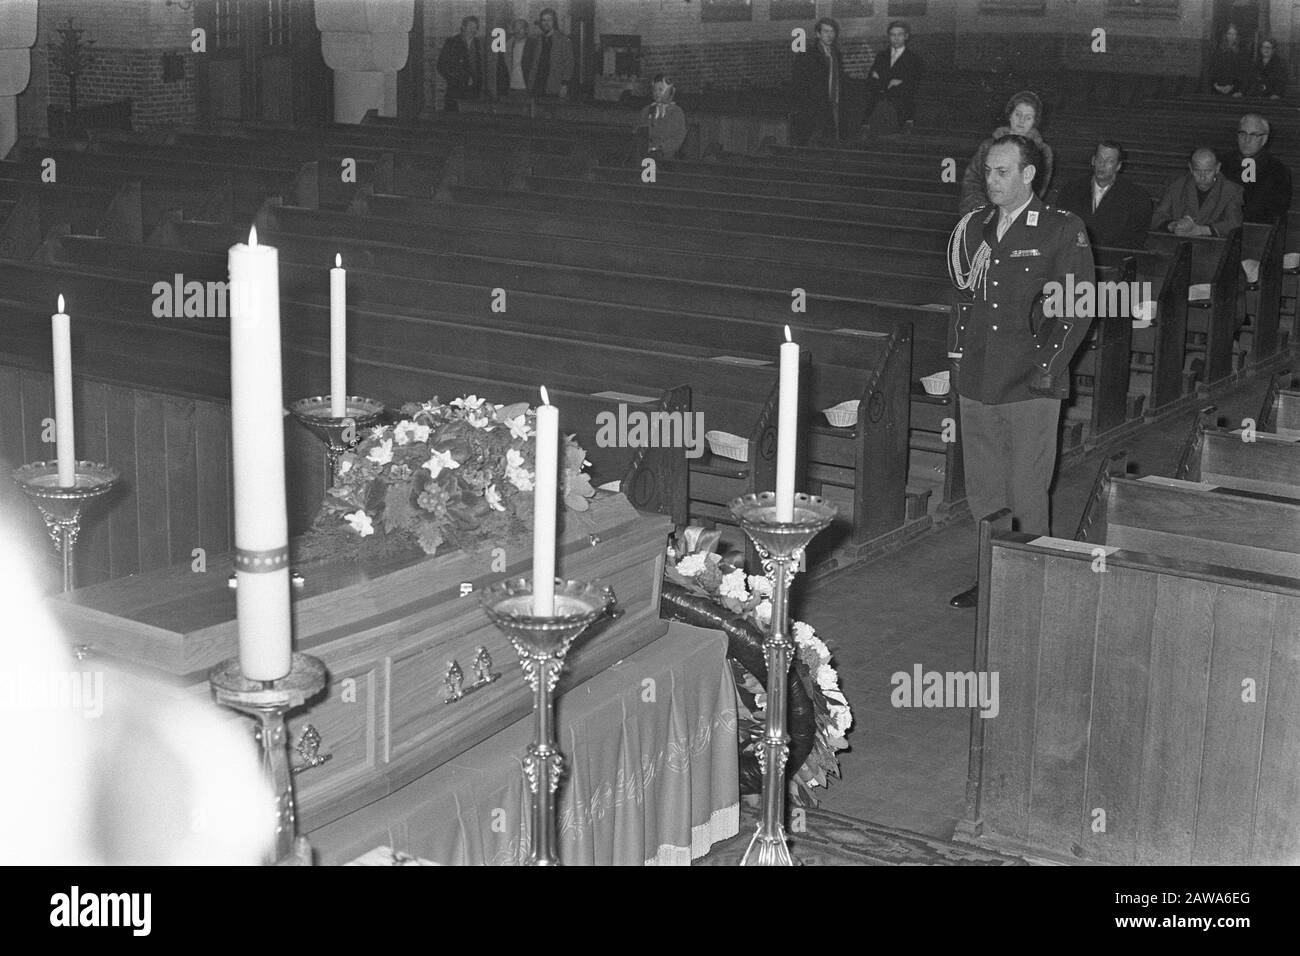 Lieutenant Colonel L. Drift puts on behalf of HM and Prince Bernhard a wreath at bier of former Prime Minister Mr. Cals in Paschaliskerk The Hague. Date: January 3 1972 Location: The Hague, South Holland Keywords: wreaths Person Name: Cals, Jo, Paschaliskerk Stock Photo